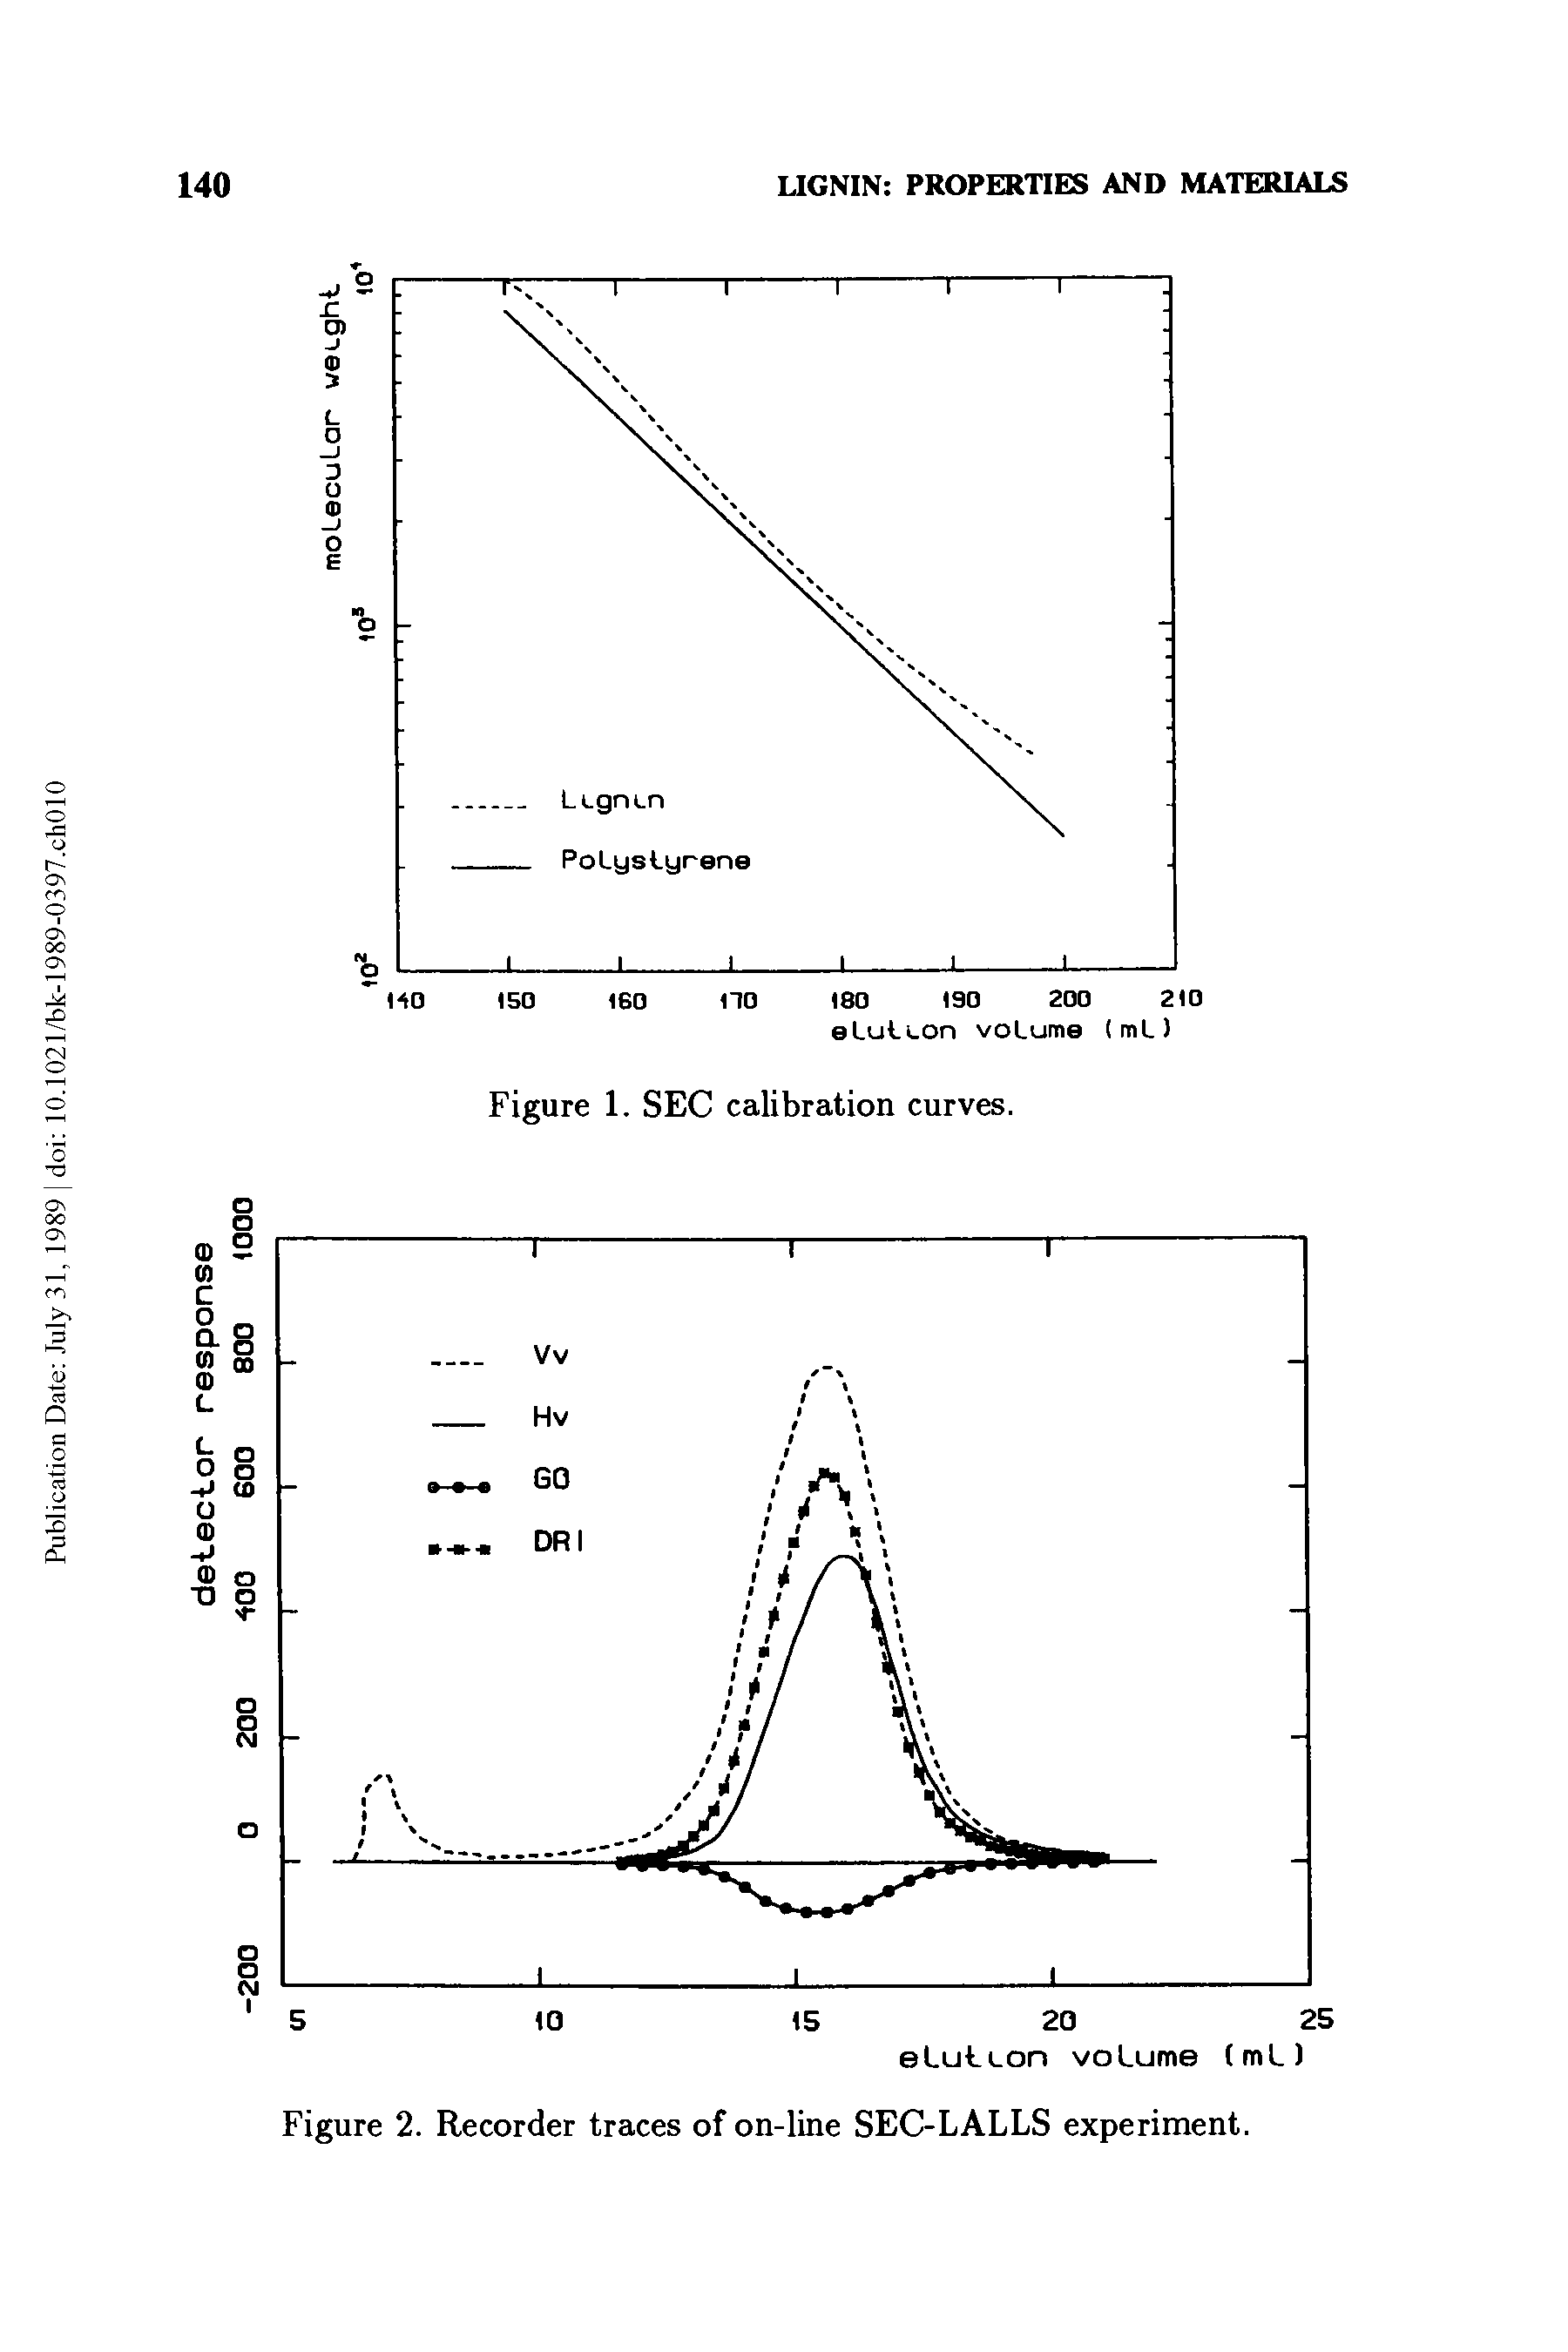 Figure 2. Recorder traces of on-line SEC-LALLS experiment.